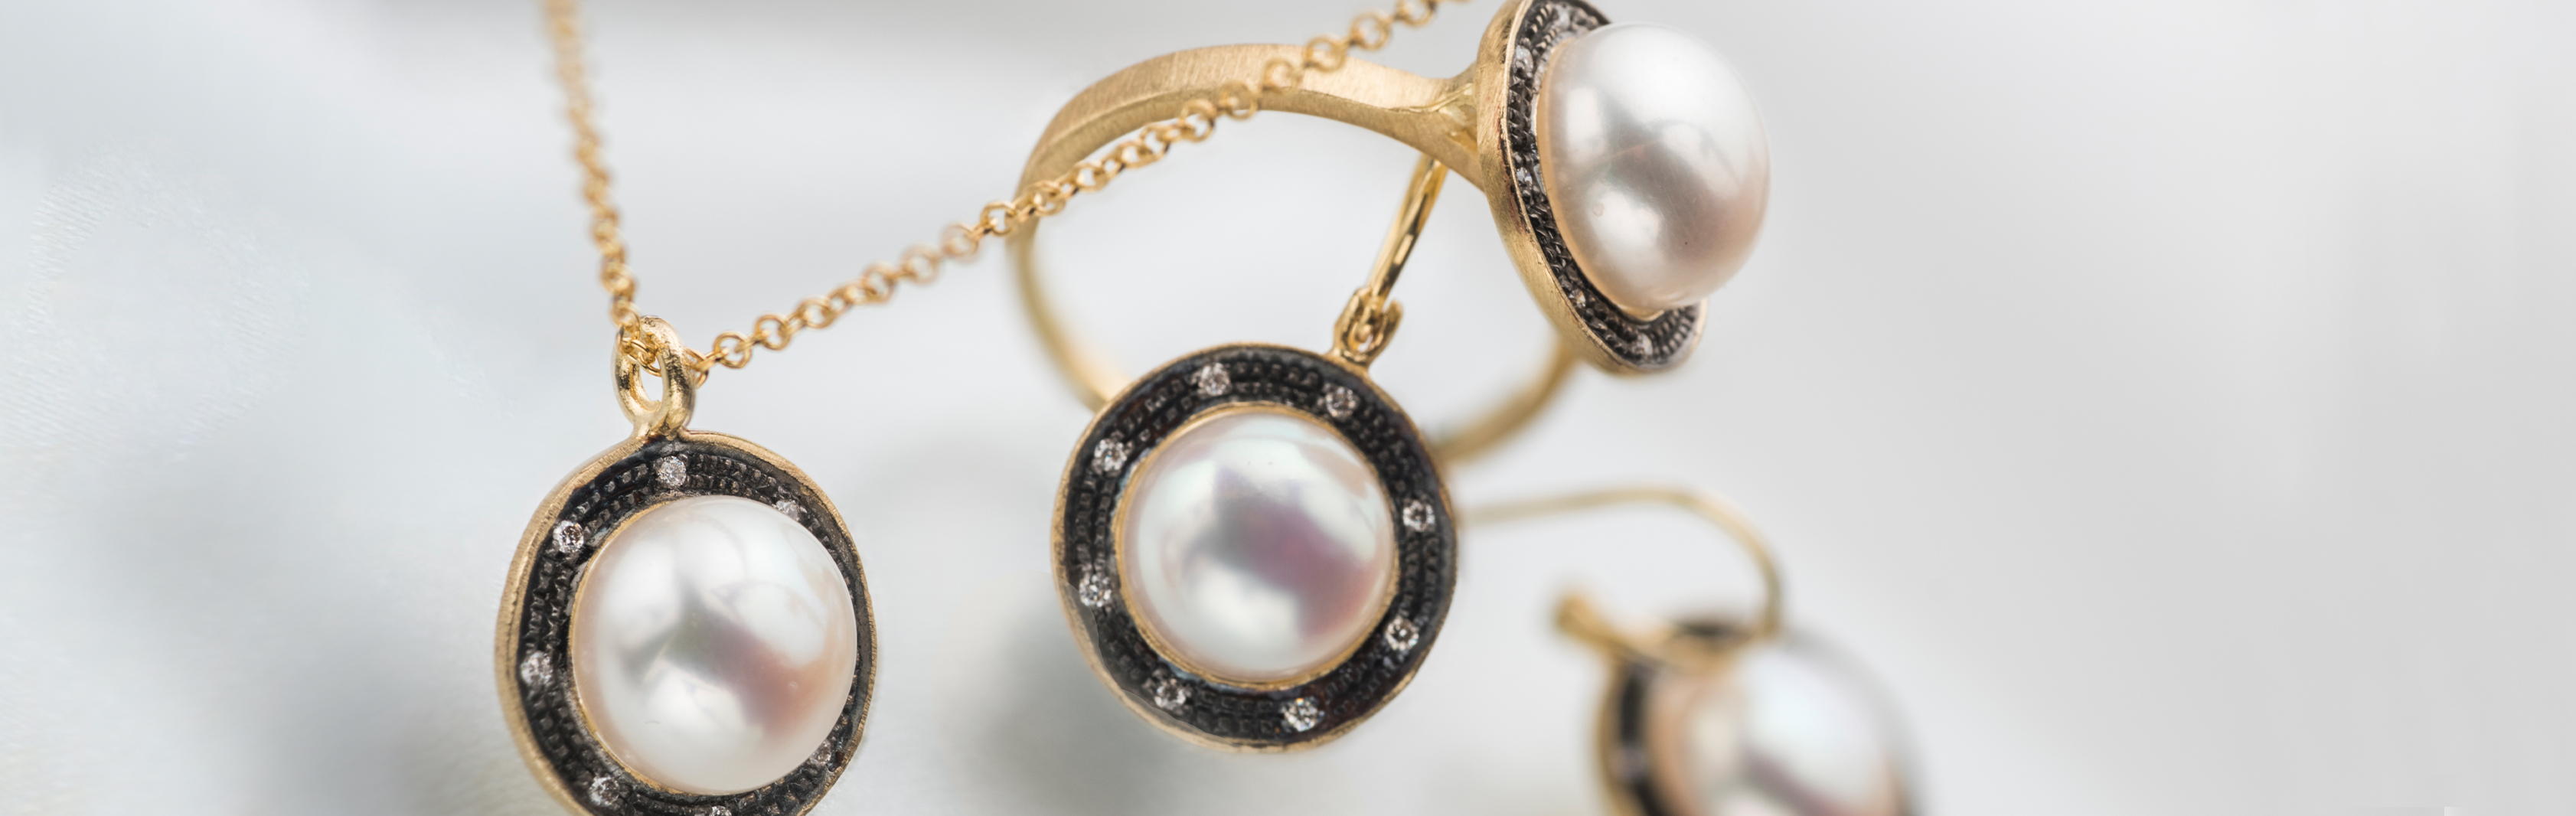 Eclipse Collection | 14K Gold Rhodium Finished Jewelry with Pearls and Diamonds